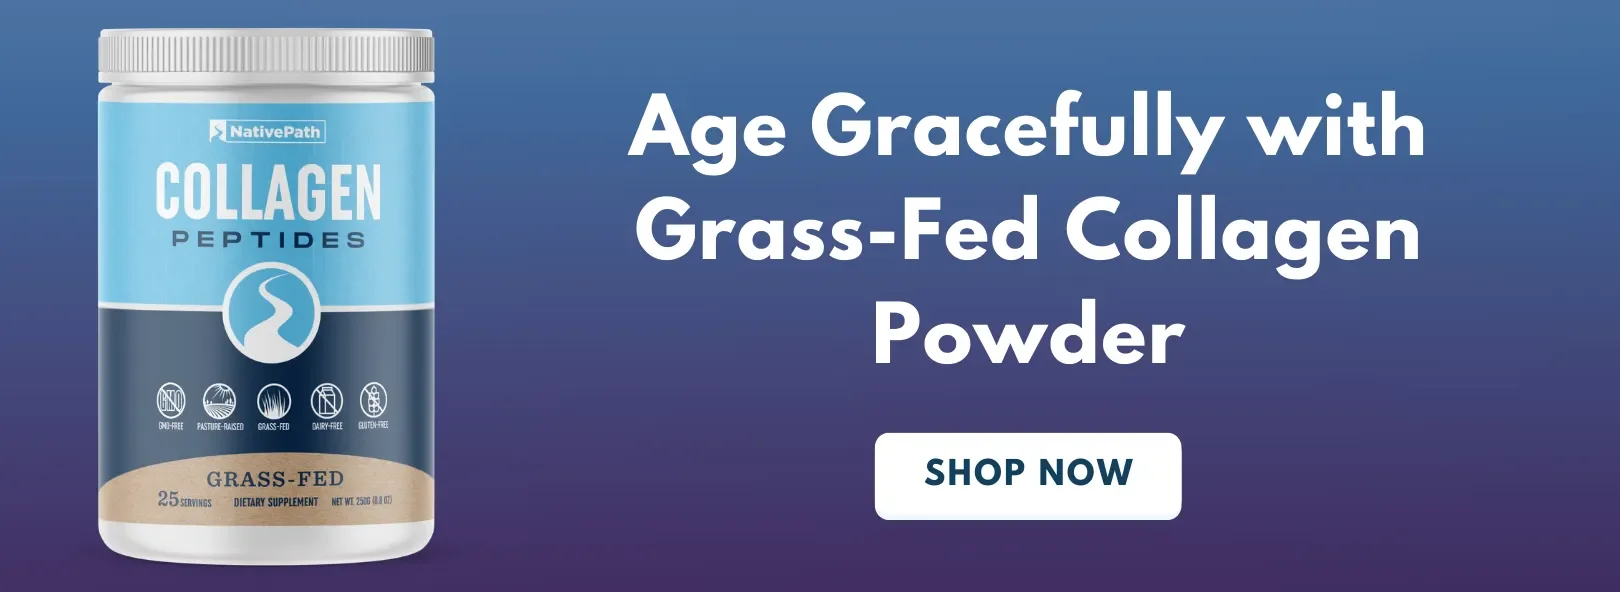 Age Gracefully with NativePath Grass-Fed Collagen Powder